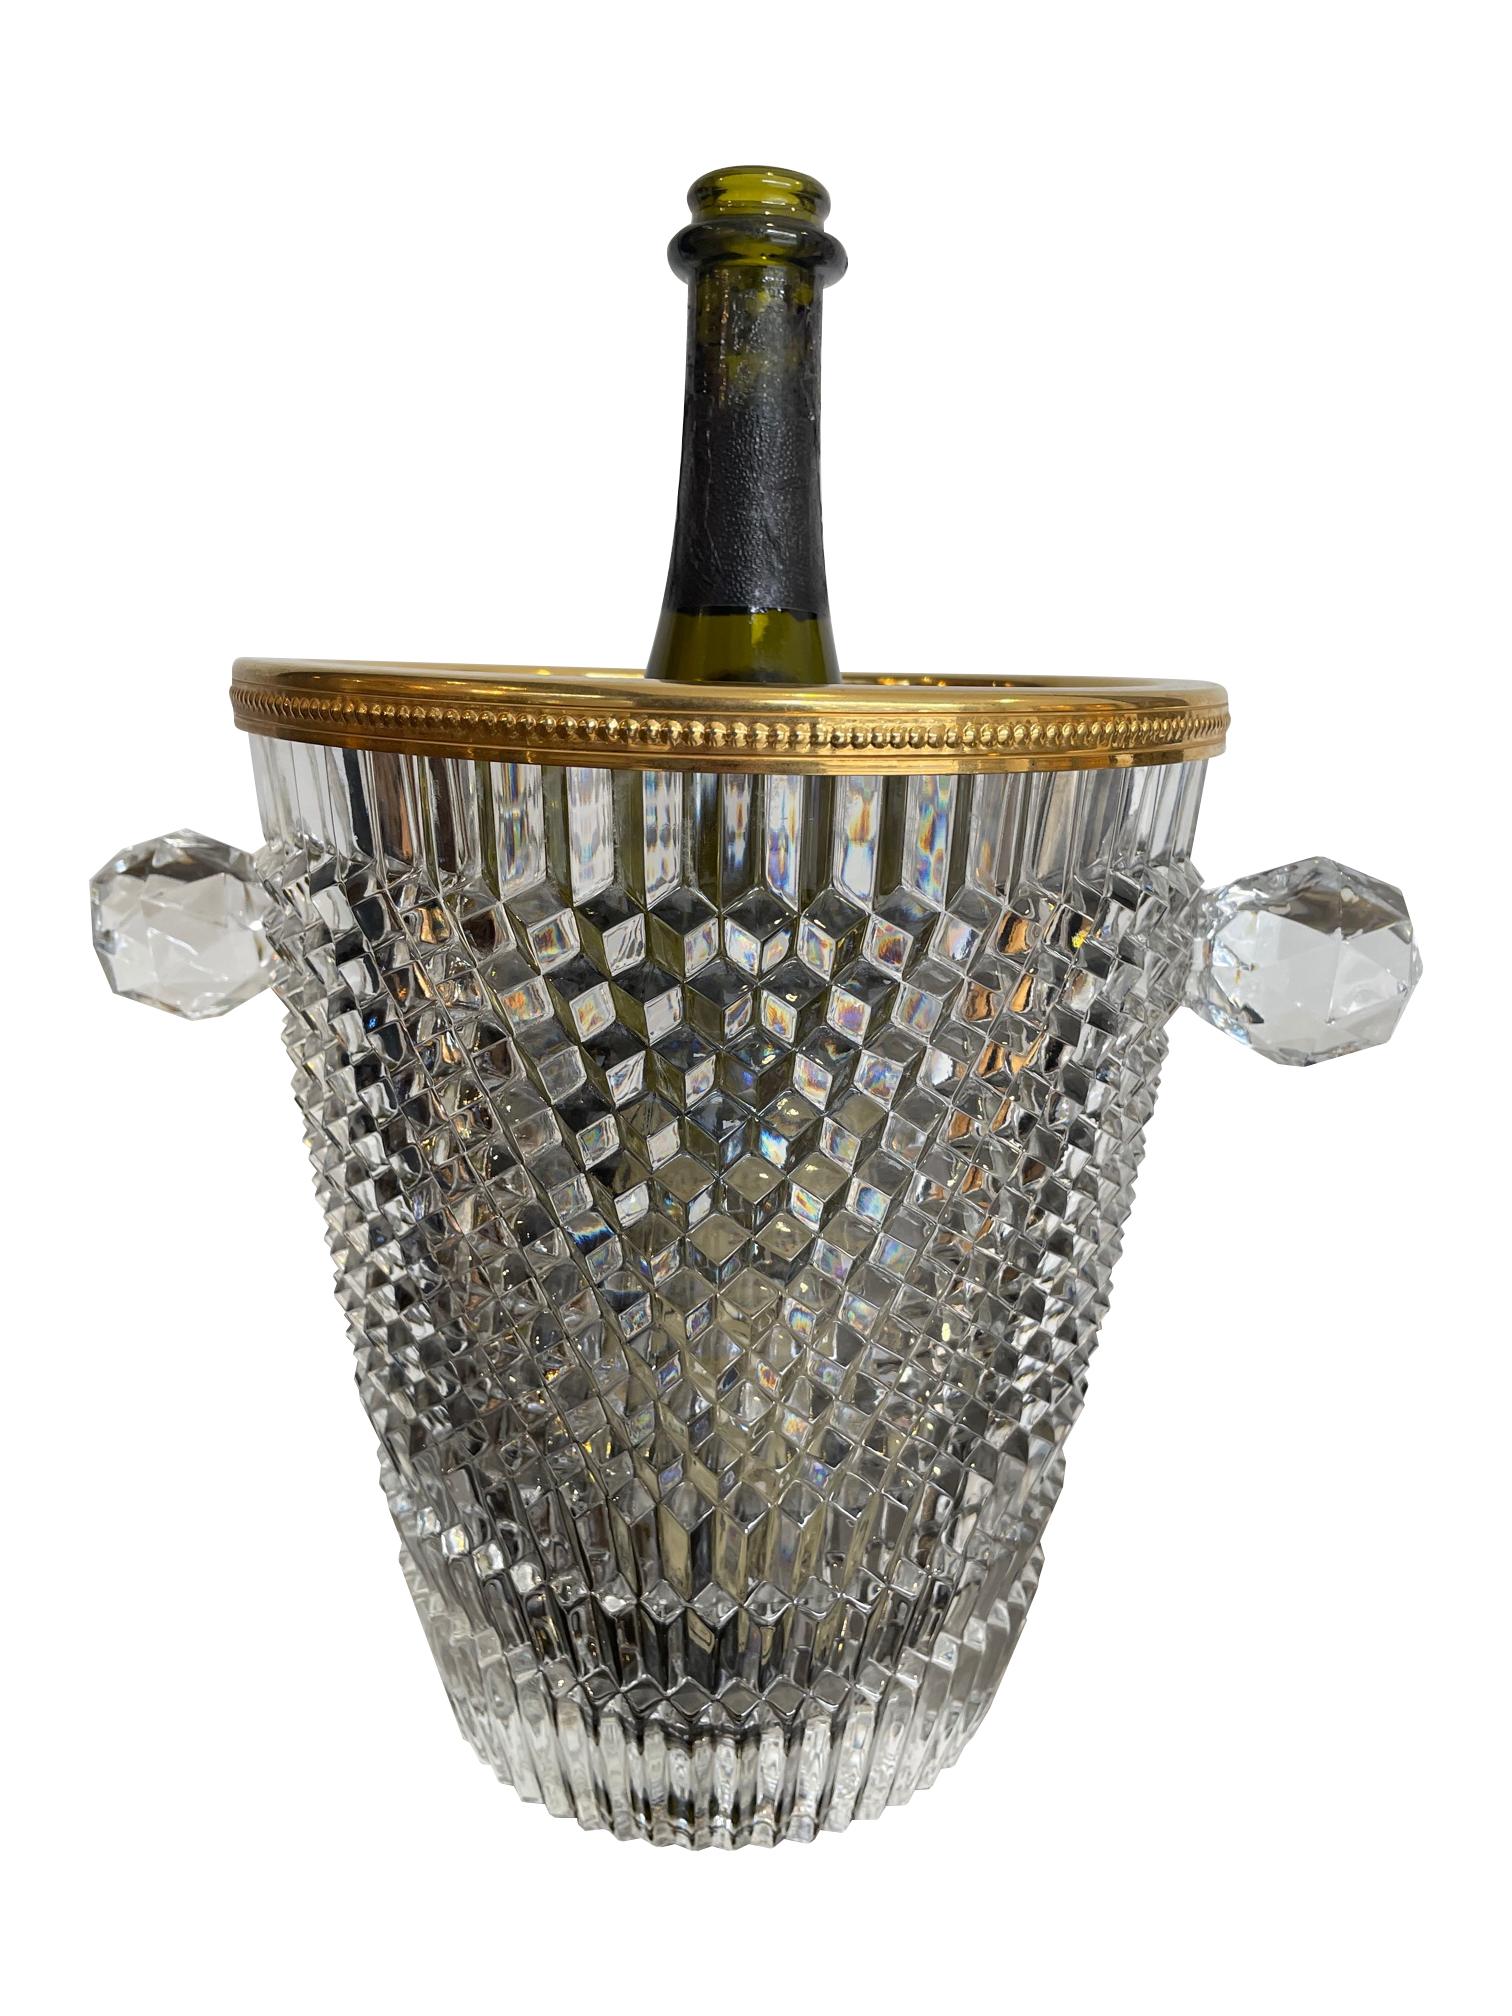 A 1950s Val St Lambert faceted crystal champagne bucket with gold plated detailed rim and faceted crystal handles. 

Glasses in the photos are not included inn the listing.